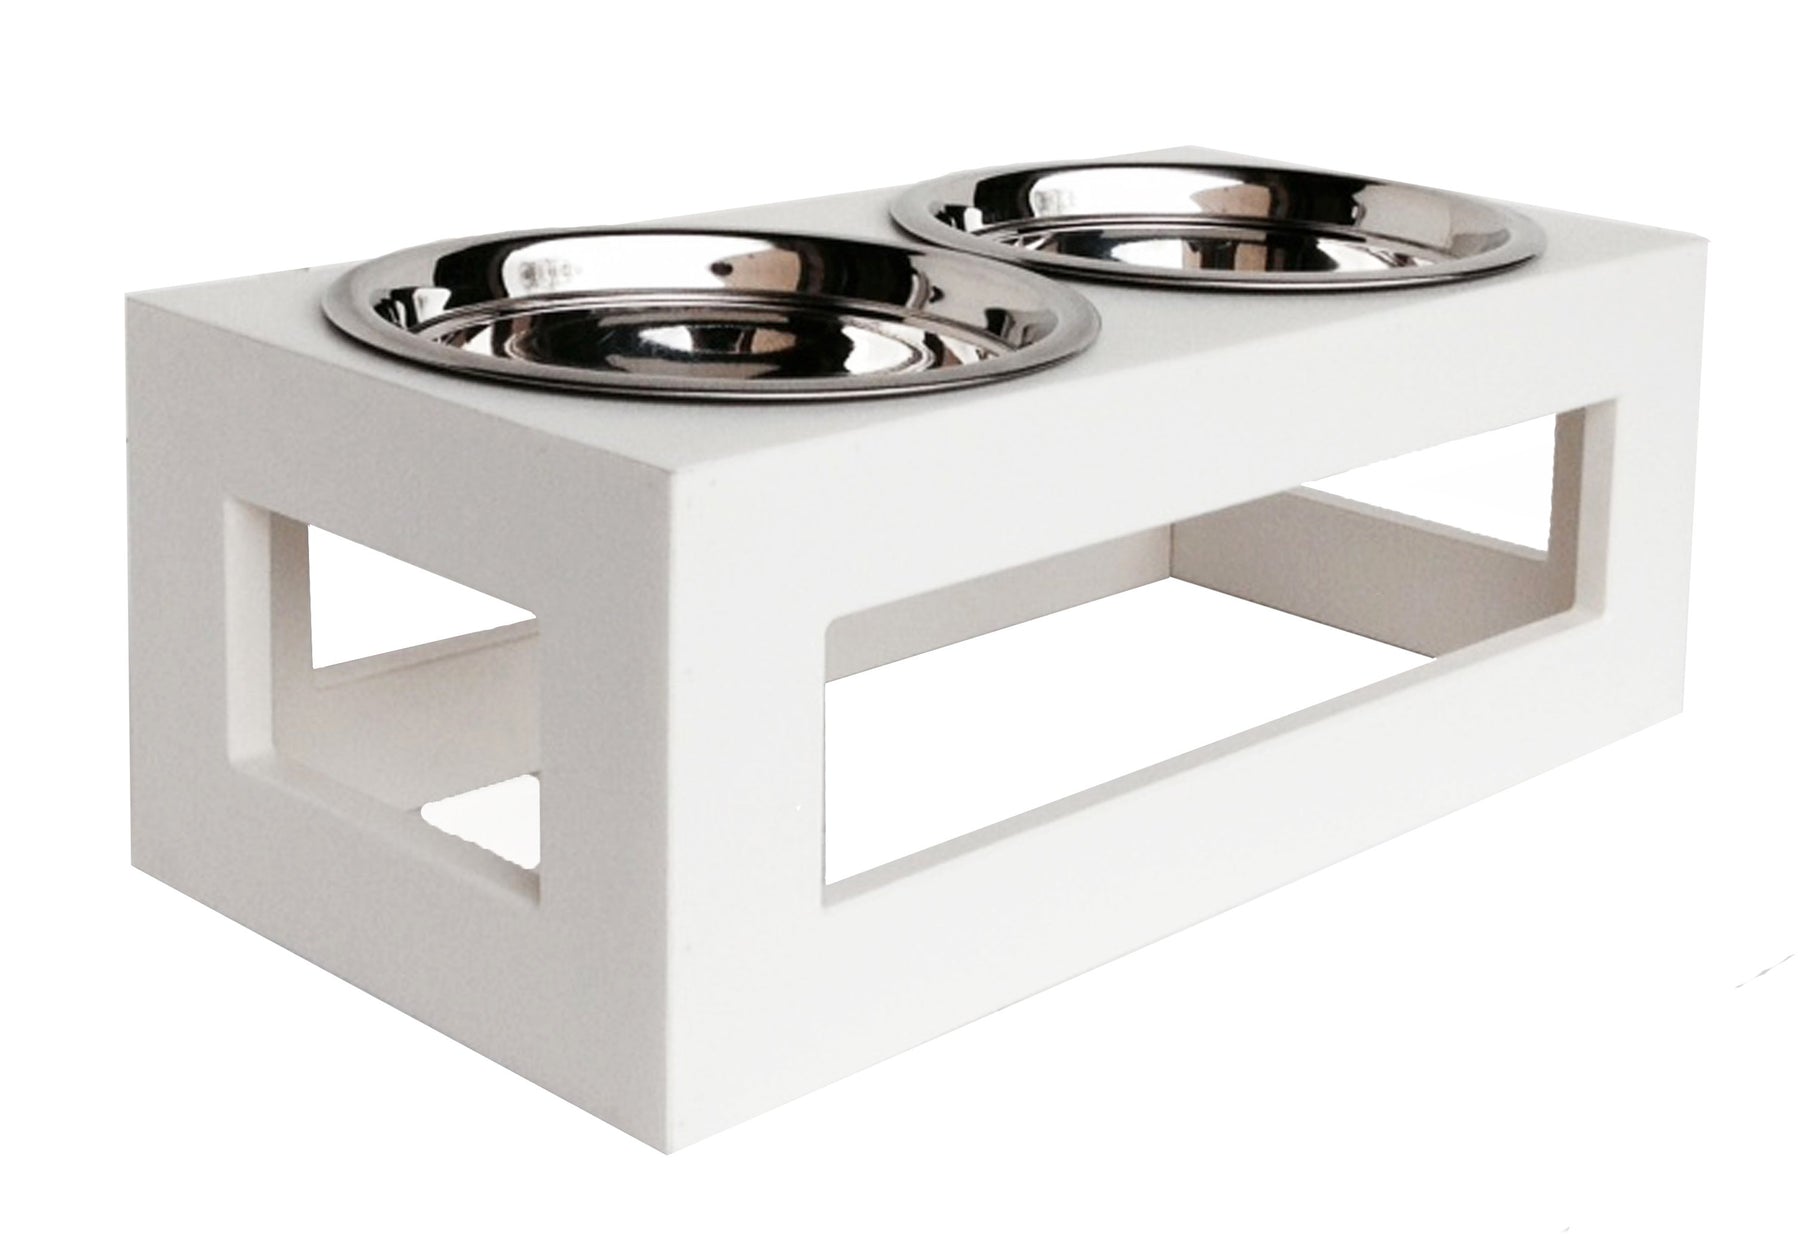 Modern Elevated Dog Bowls for Small Dogs, Raised Food and Water Bowl Stand  Sets 3 - 7, Best Elevated Feeder Stainless Steel